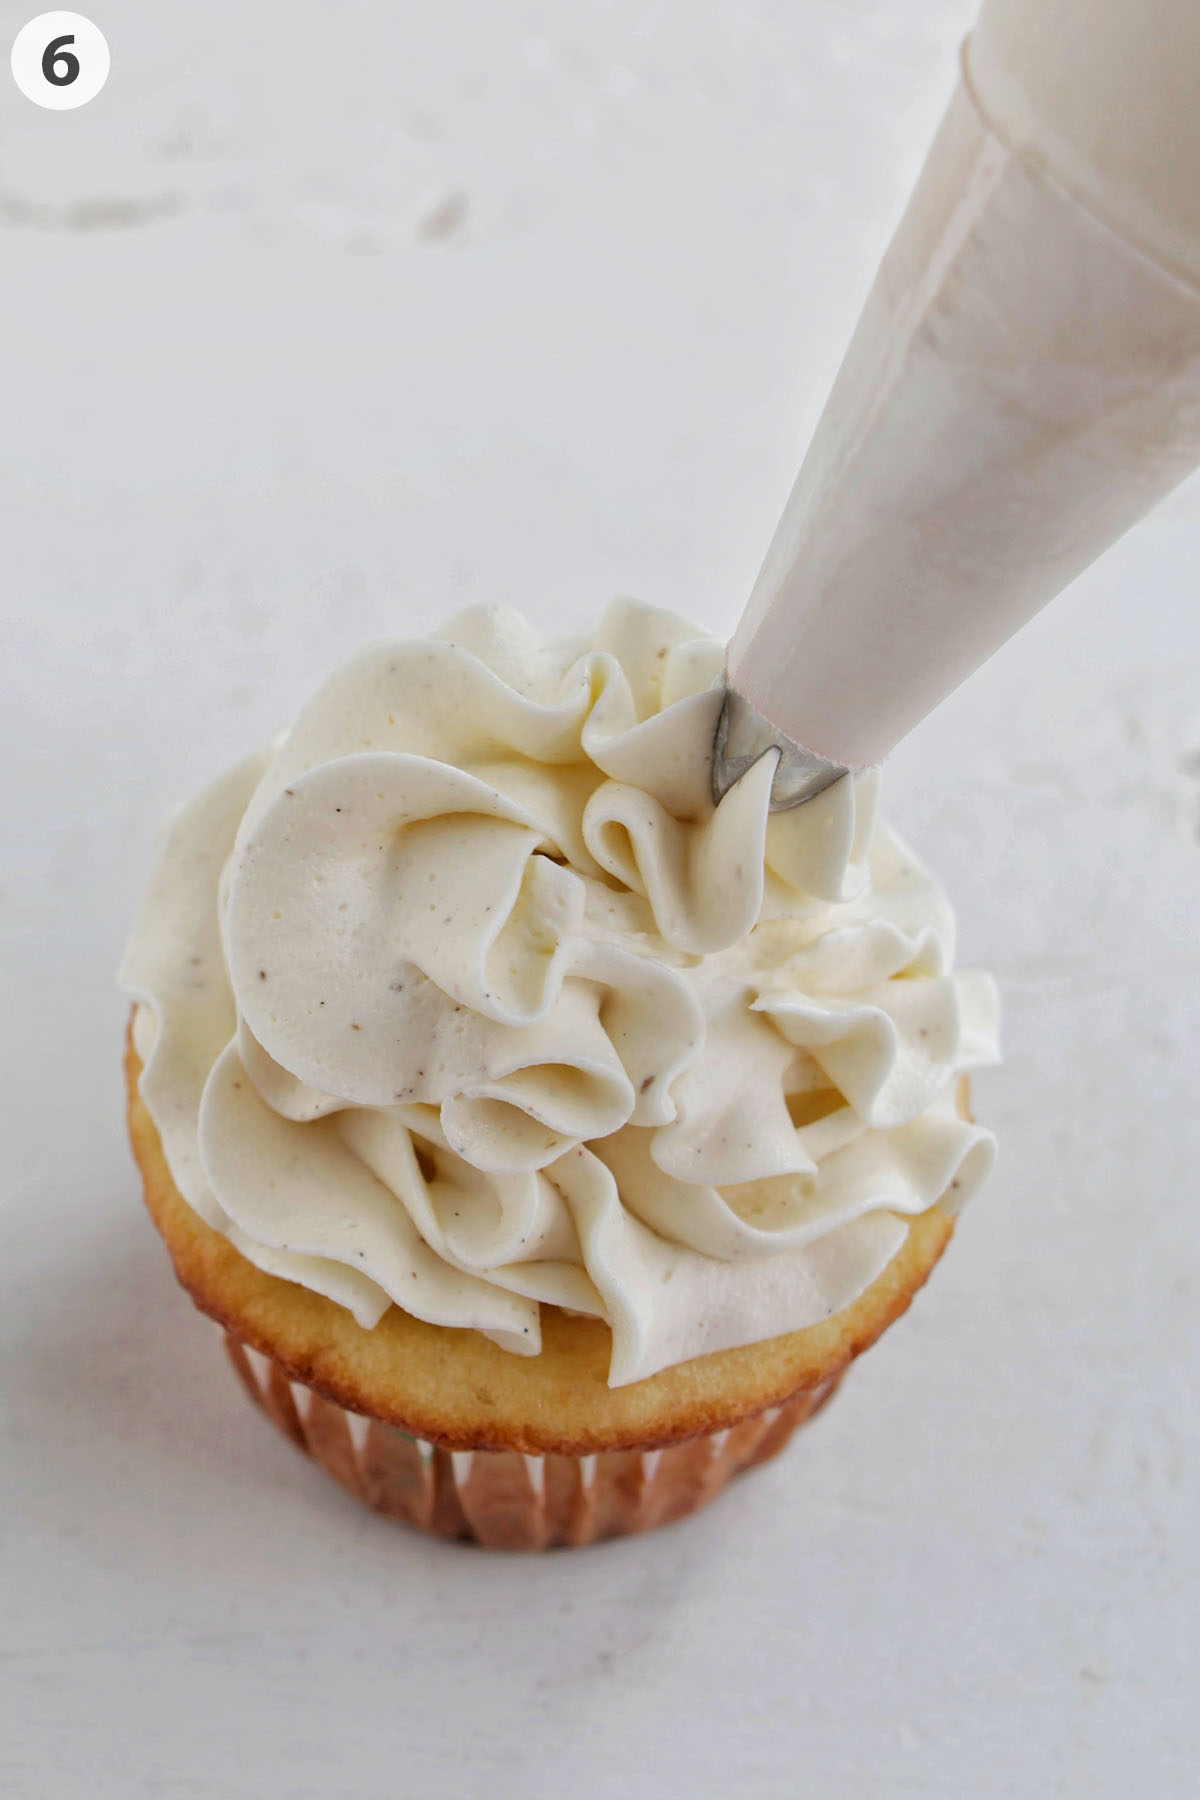 numbered photo showing how to frost a cupcake with vanilla frosting.